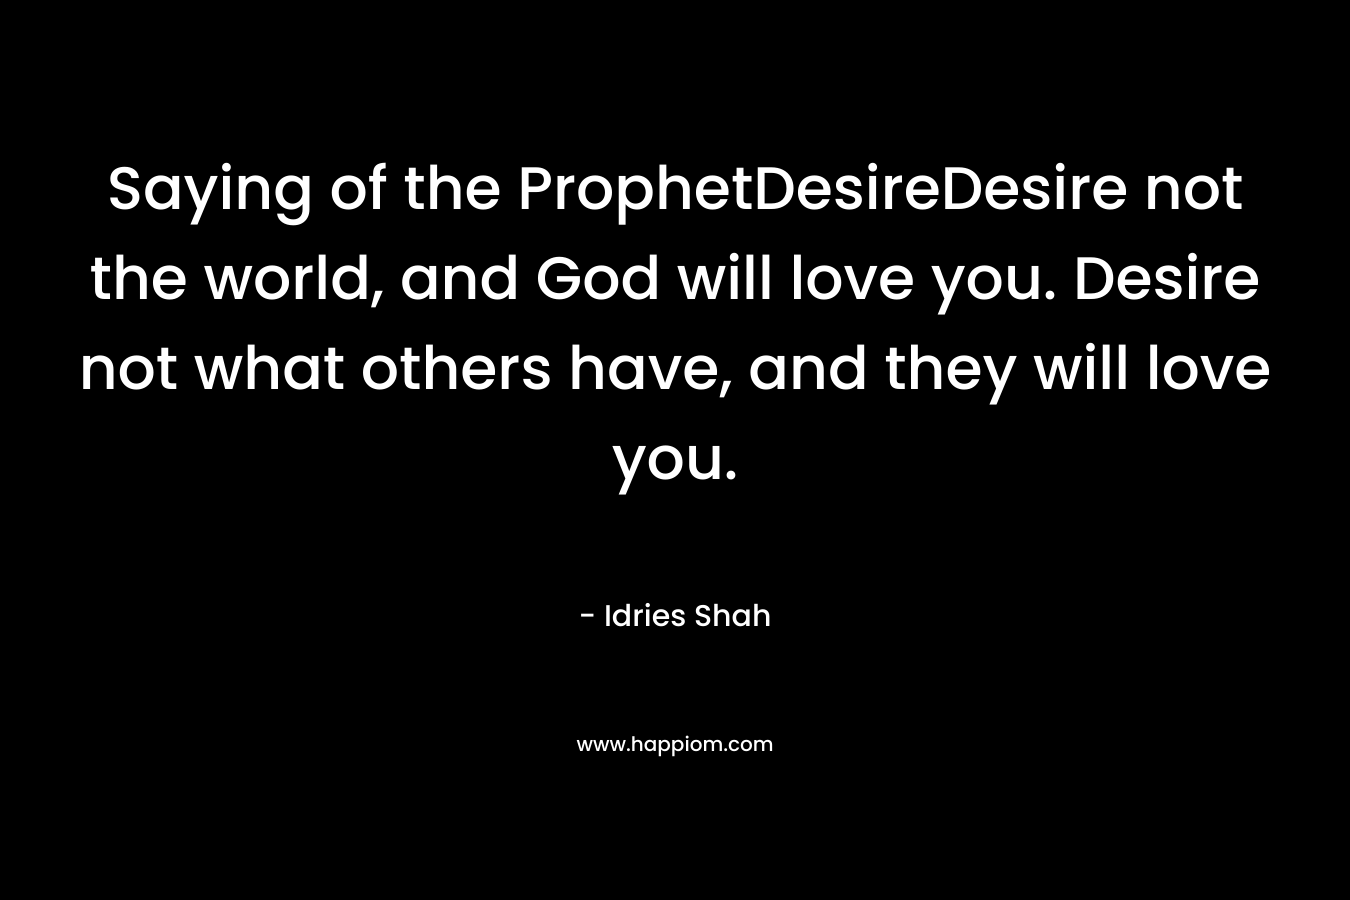 Saying of the ProphetDesireDesire not the world, and God will love you. Desire not what others have, and they will love you.